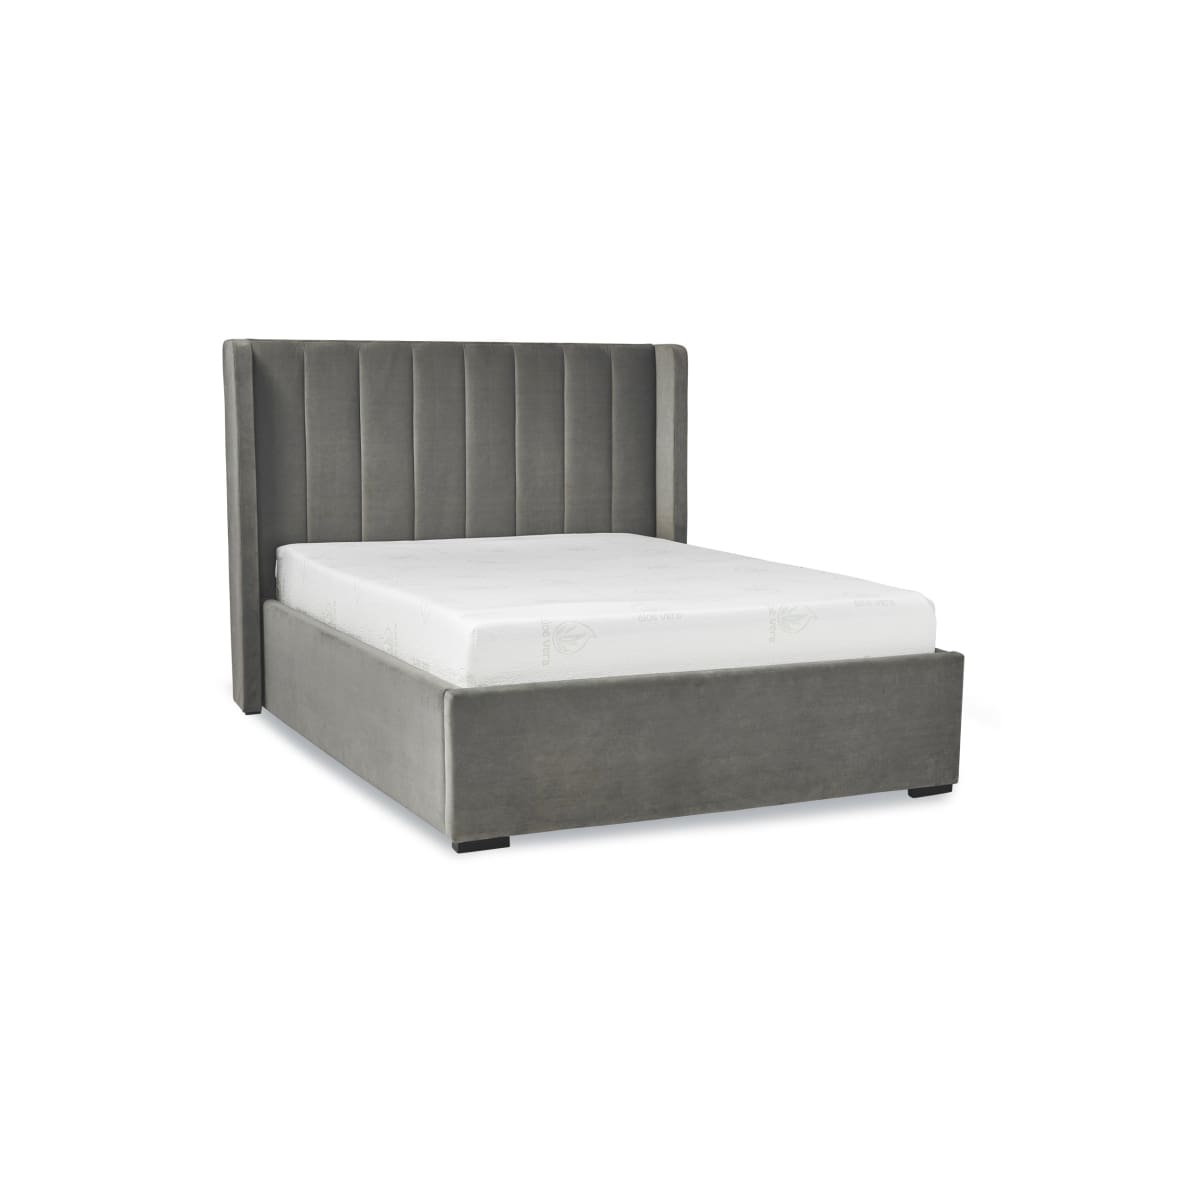 Aava Storage Bed - bed